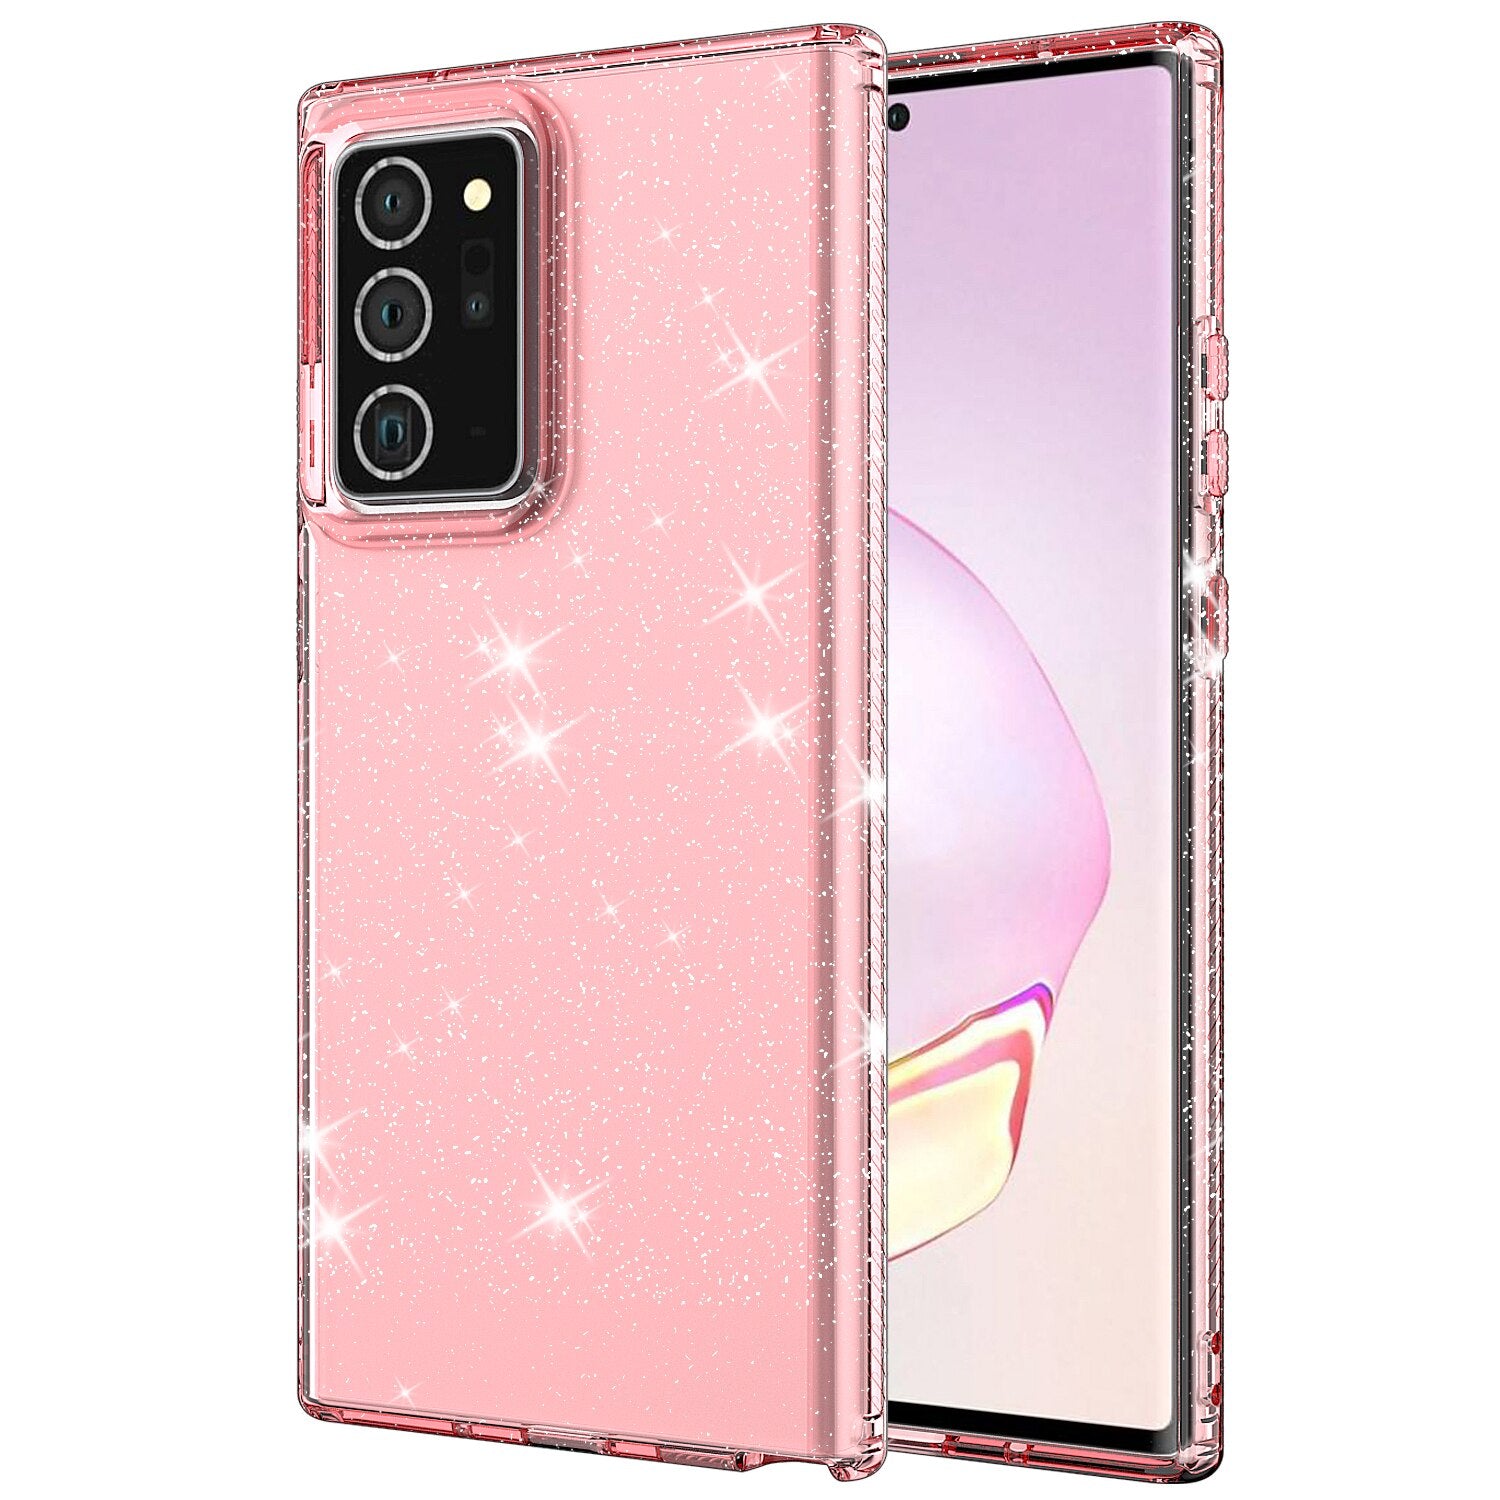 Glitter Case For Samsung Note 20 Ultra Case Galaxy Note 20 Cover Clear Matte Anti-fall for Samsung Galaxy Note 20 Ultra - 380230 for Note 20 / Pink / United States Find Epic Store